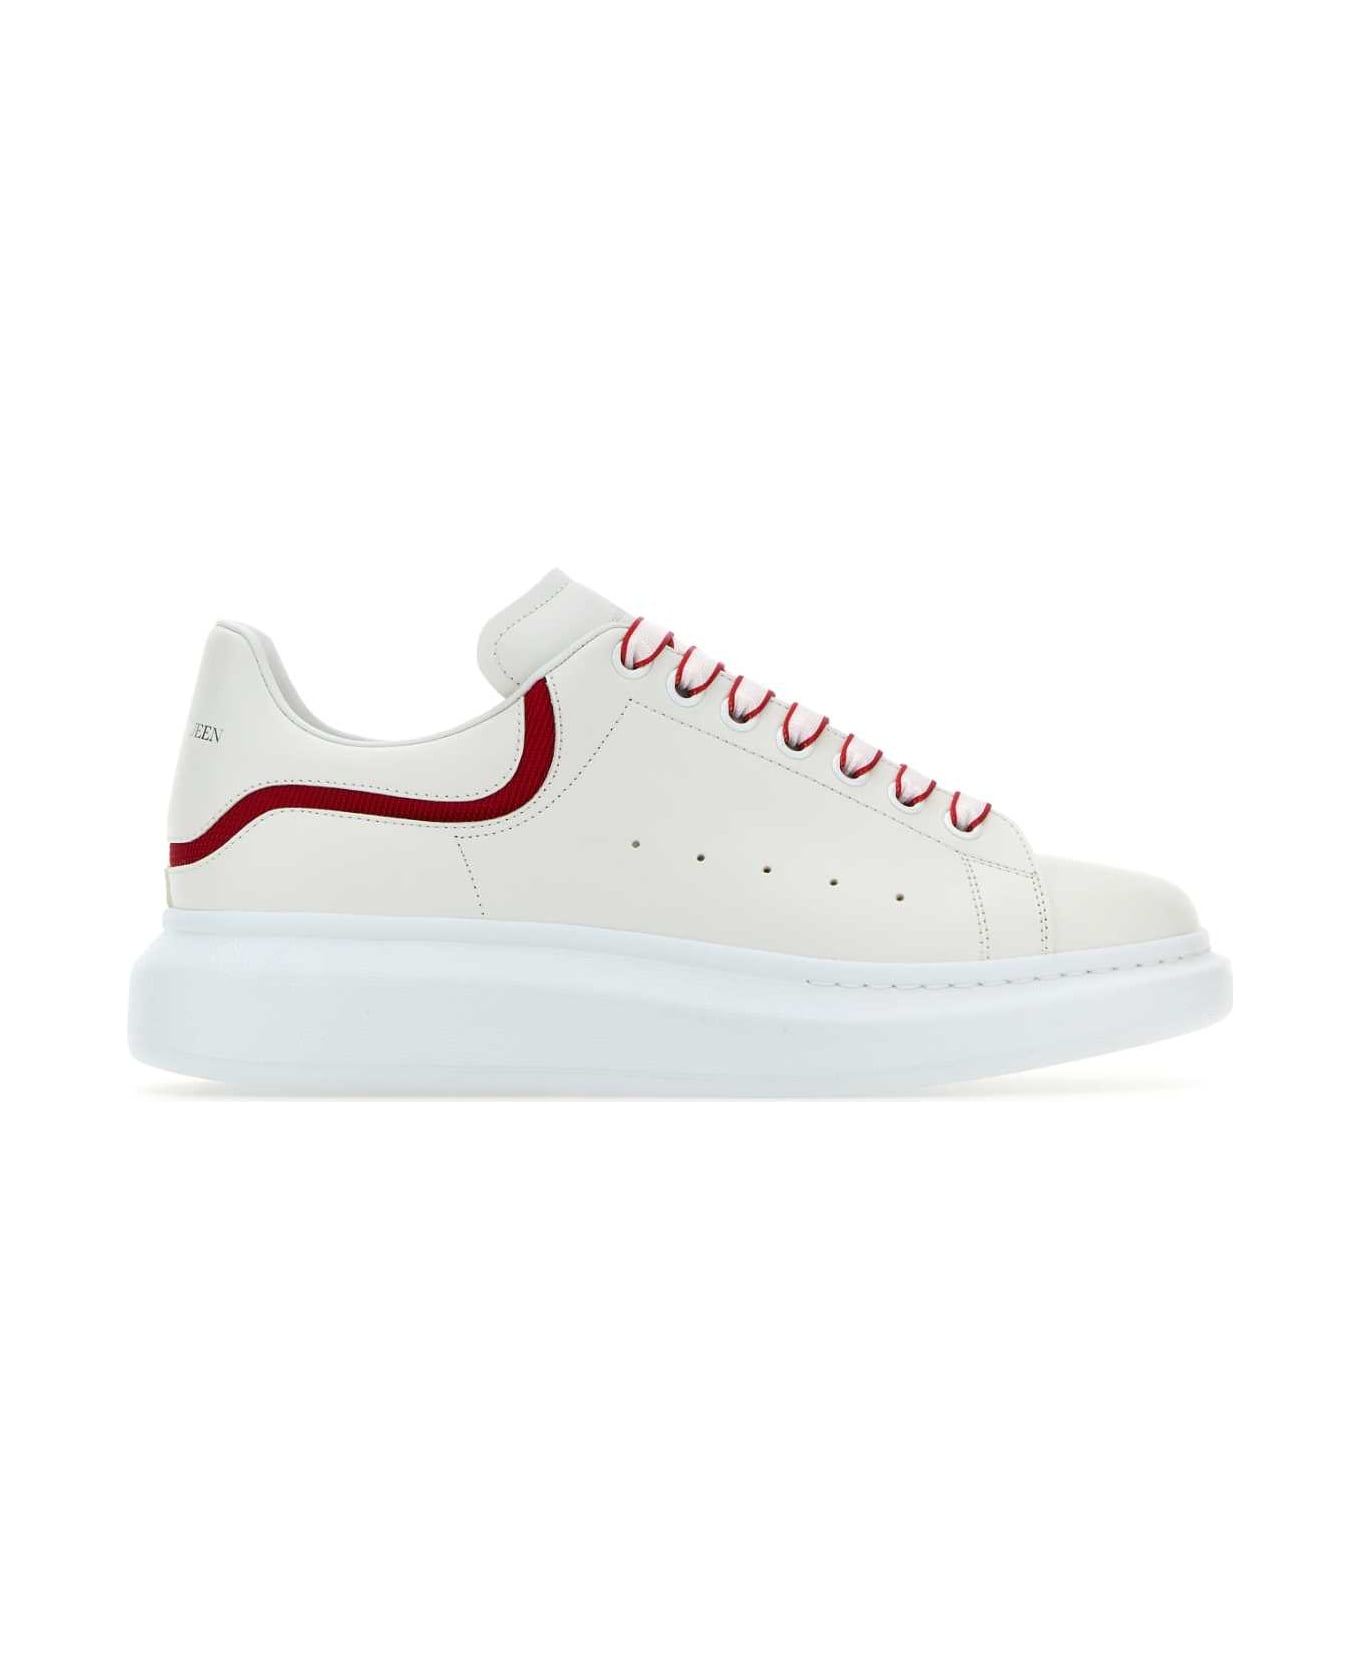 Alexander McQueen White Leather Sneakers With White Leather Heel - WHITERED スニーカー